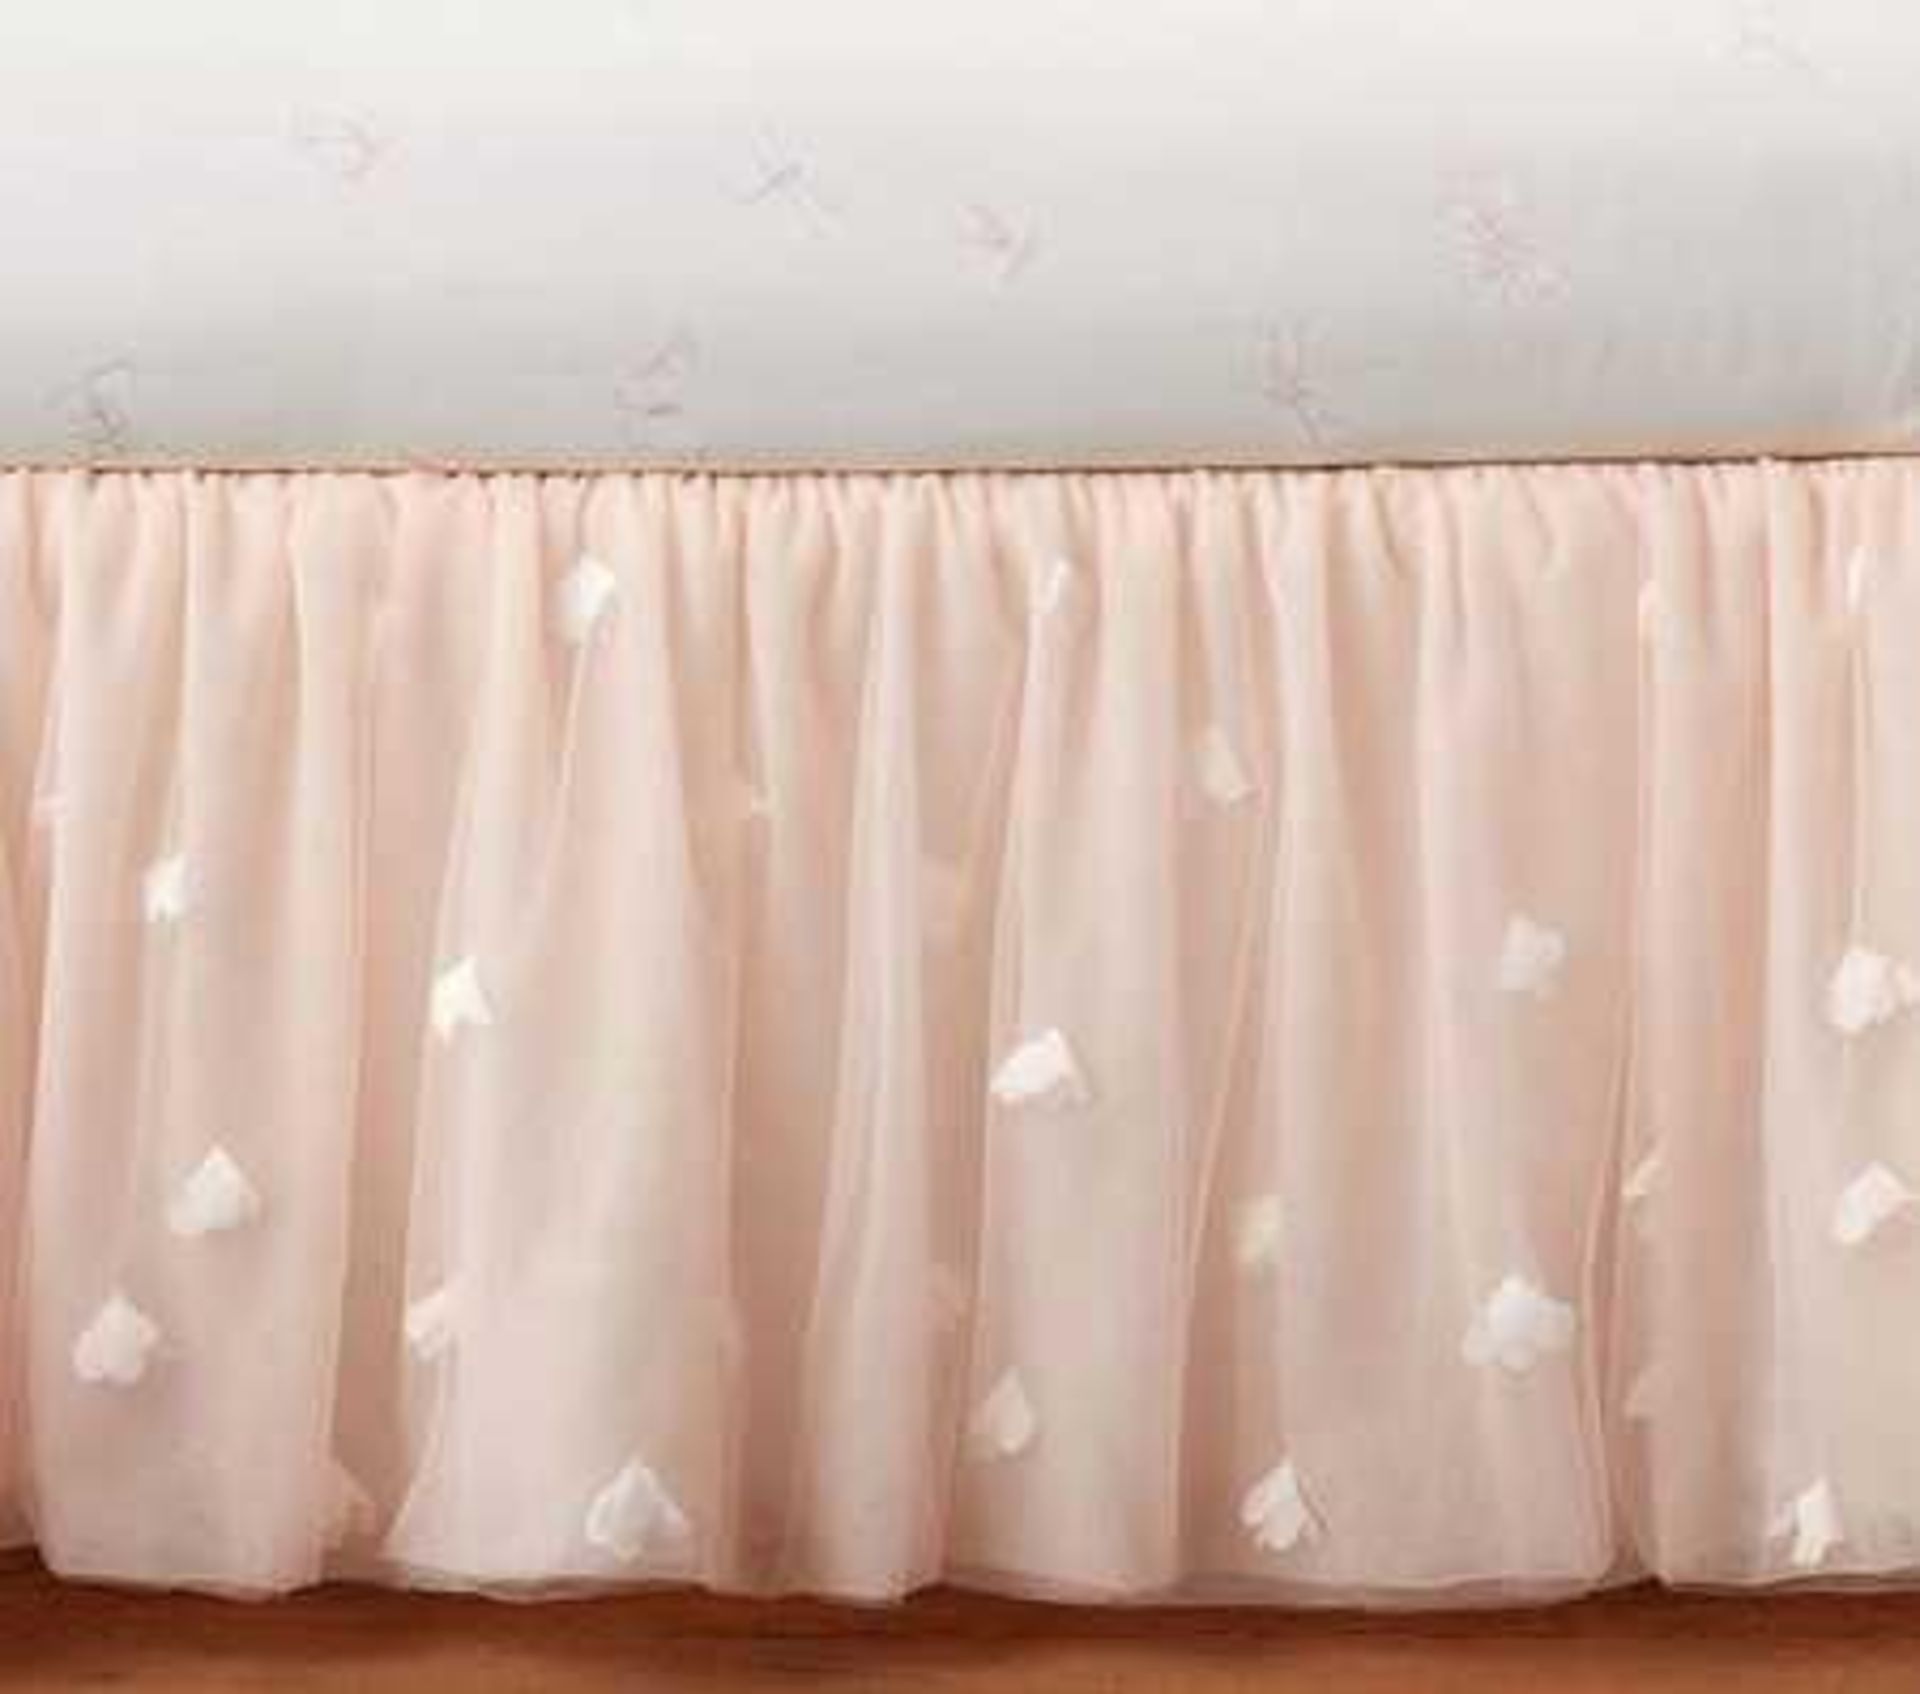 RRP £130 bagged Monique Lhuillier Sateen Ethereal Butterfly Baby Bed Linen - Image 2 of 2